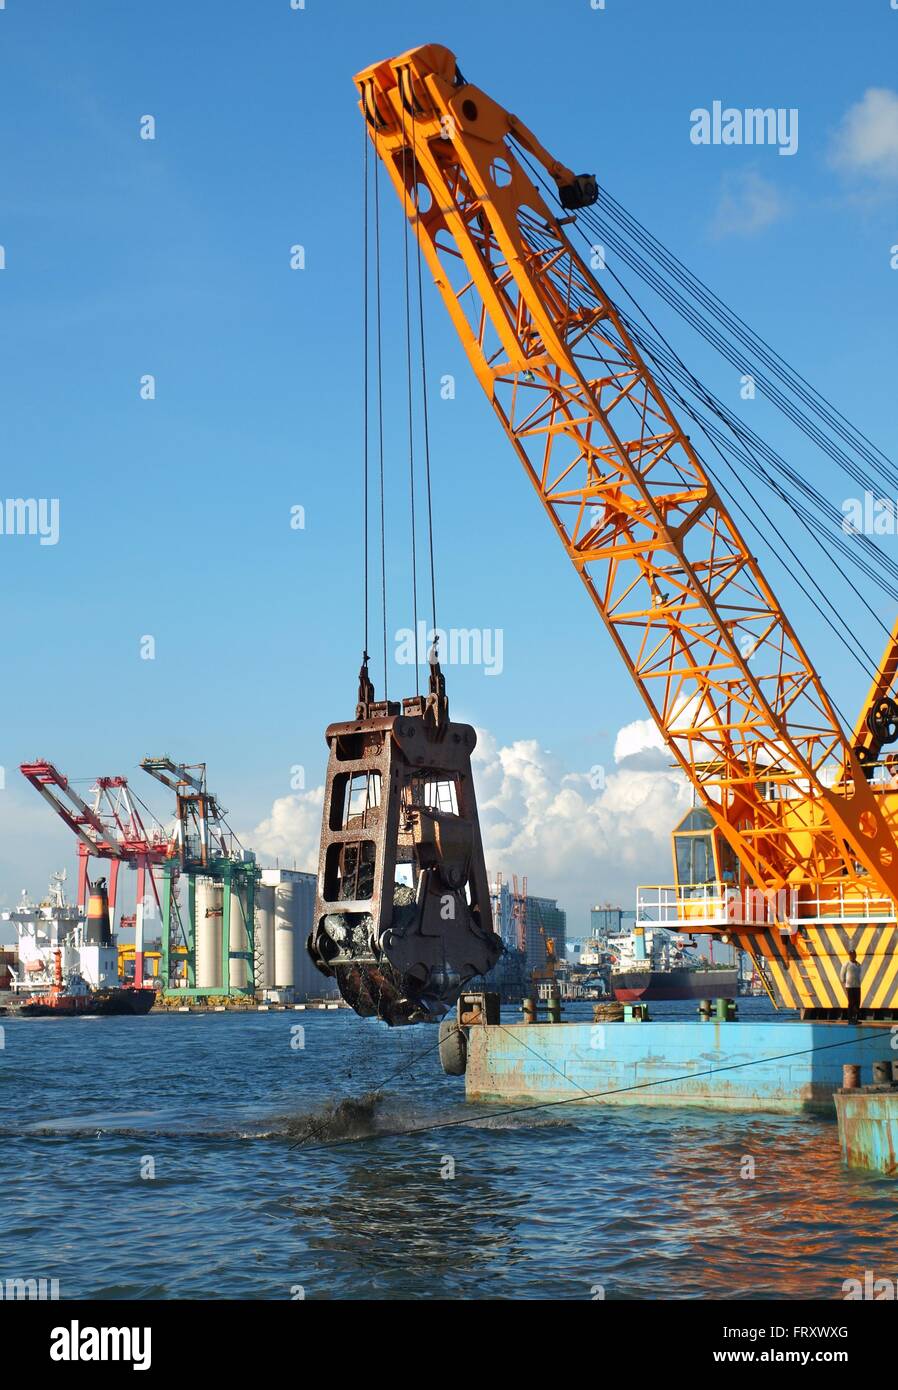 A clamshell dredger mounted on a barge in Kaohsiung port Stock Photo